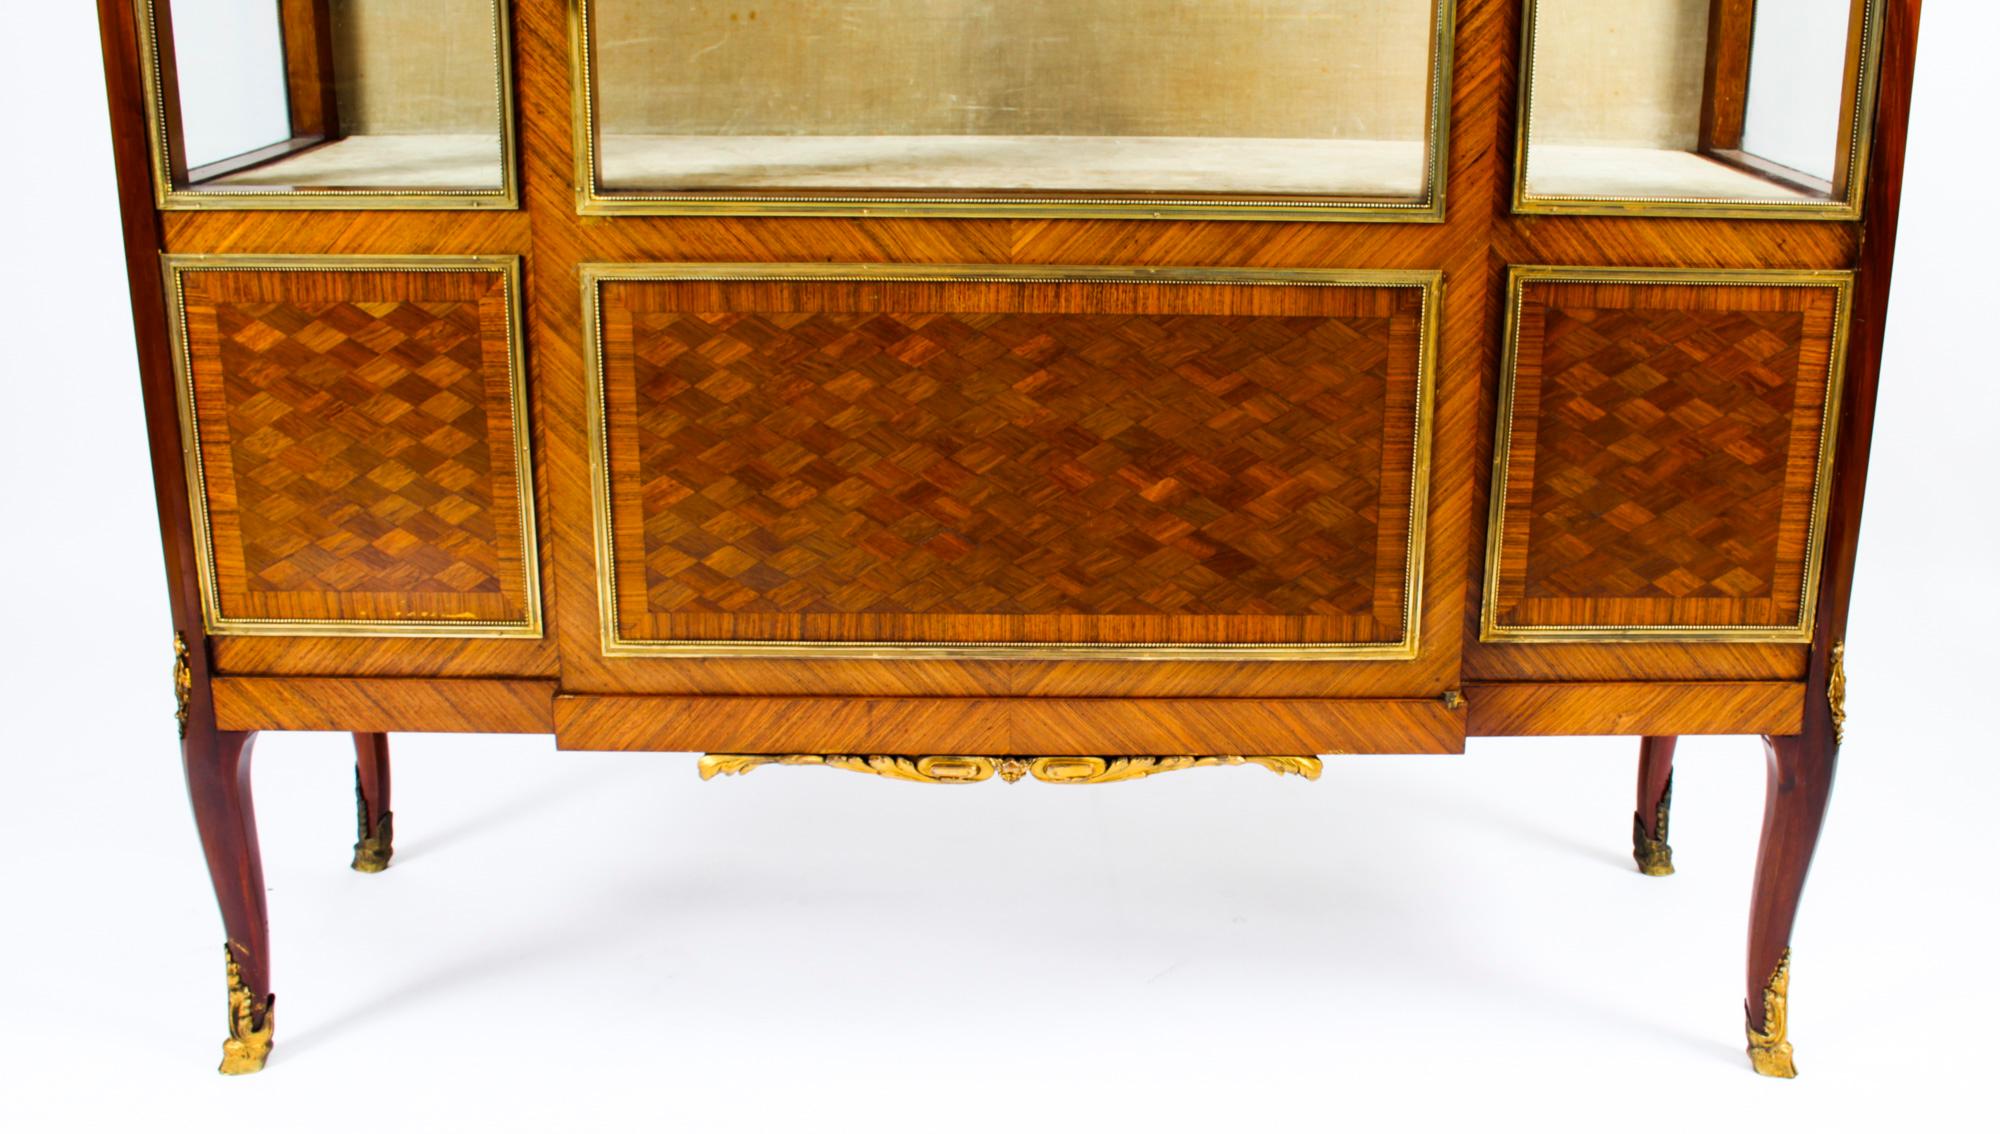 Antique French Parquetry Ormolu Mounted Vitrine Cabinet 19th C For Sale 5